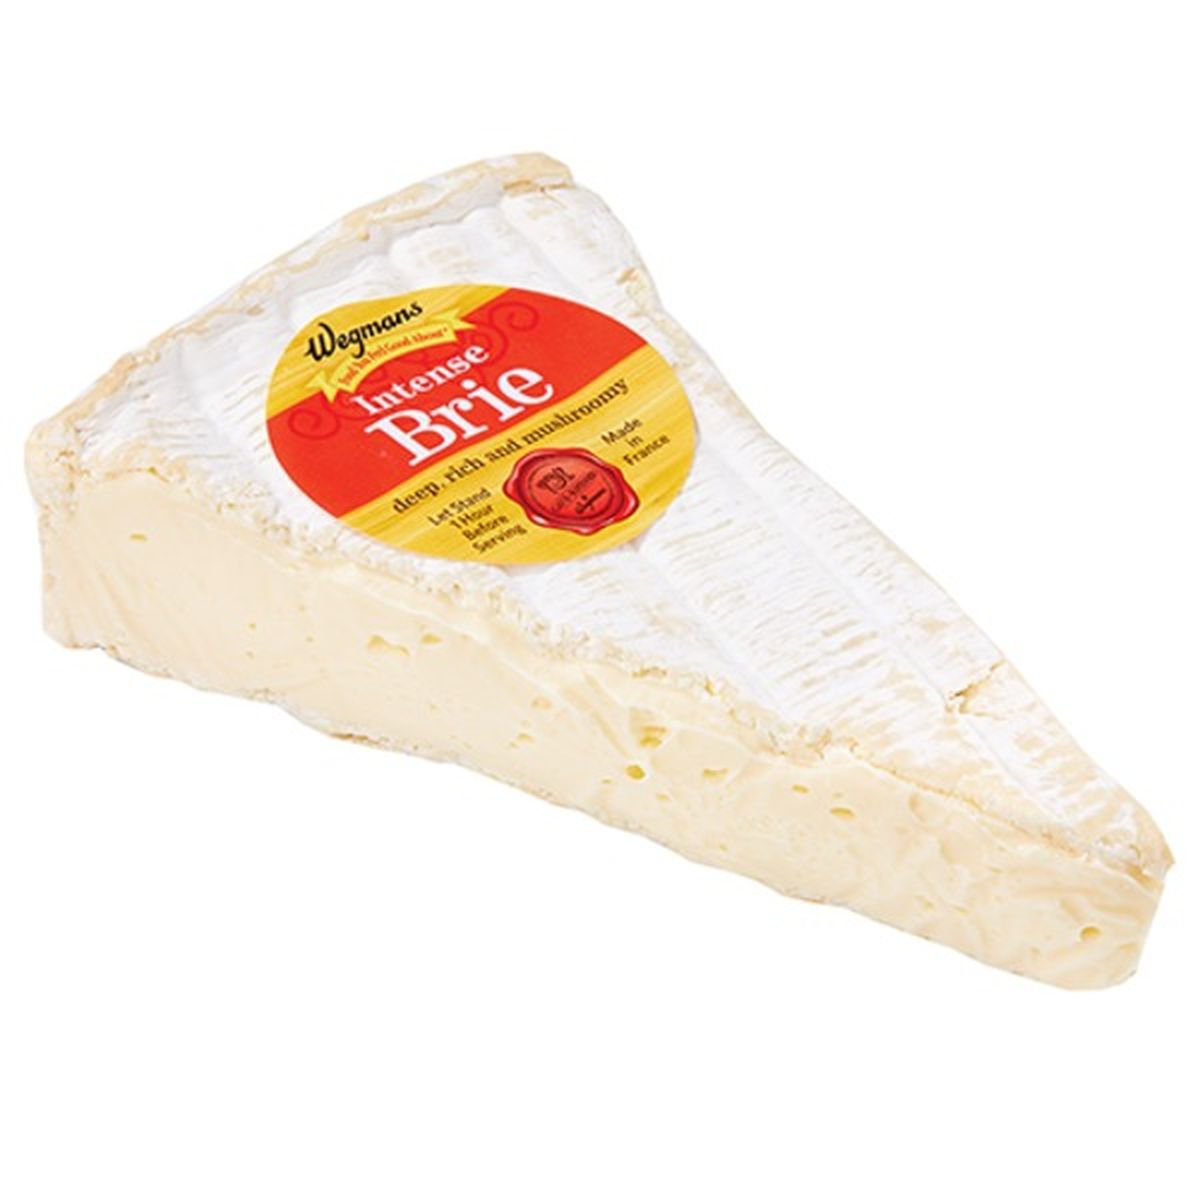 Calories in Wegmans Cave-Ripened Intense Brie Cheese, Earthy